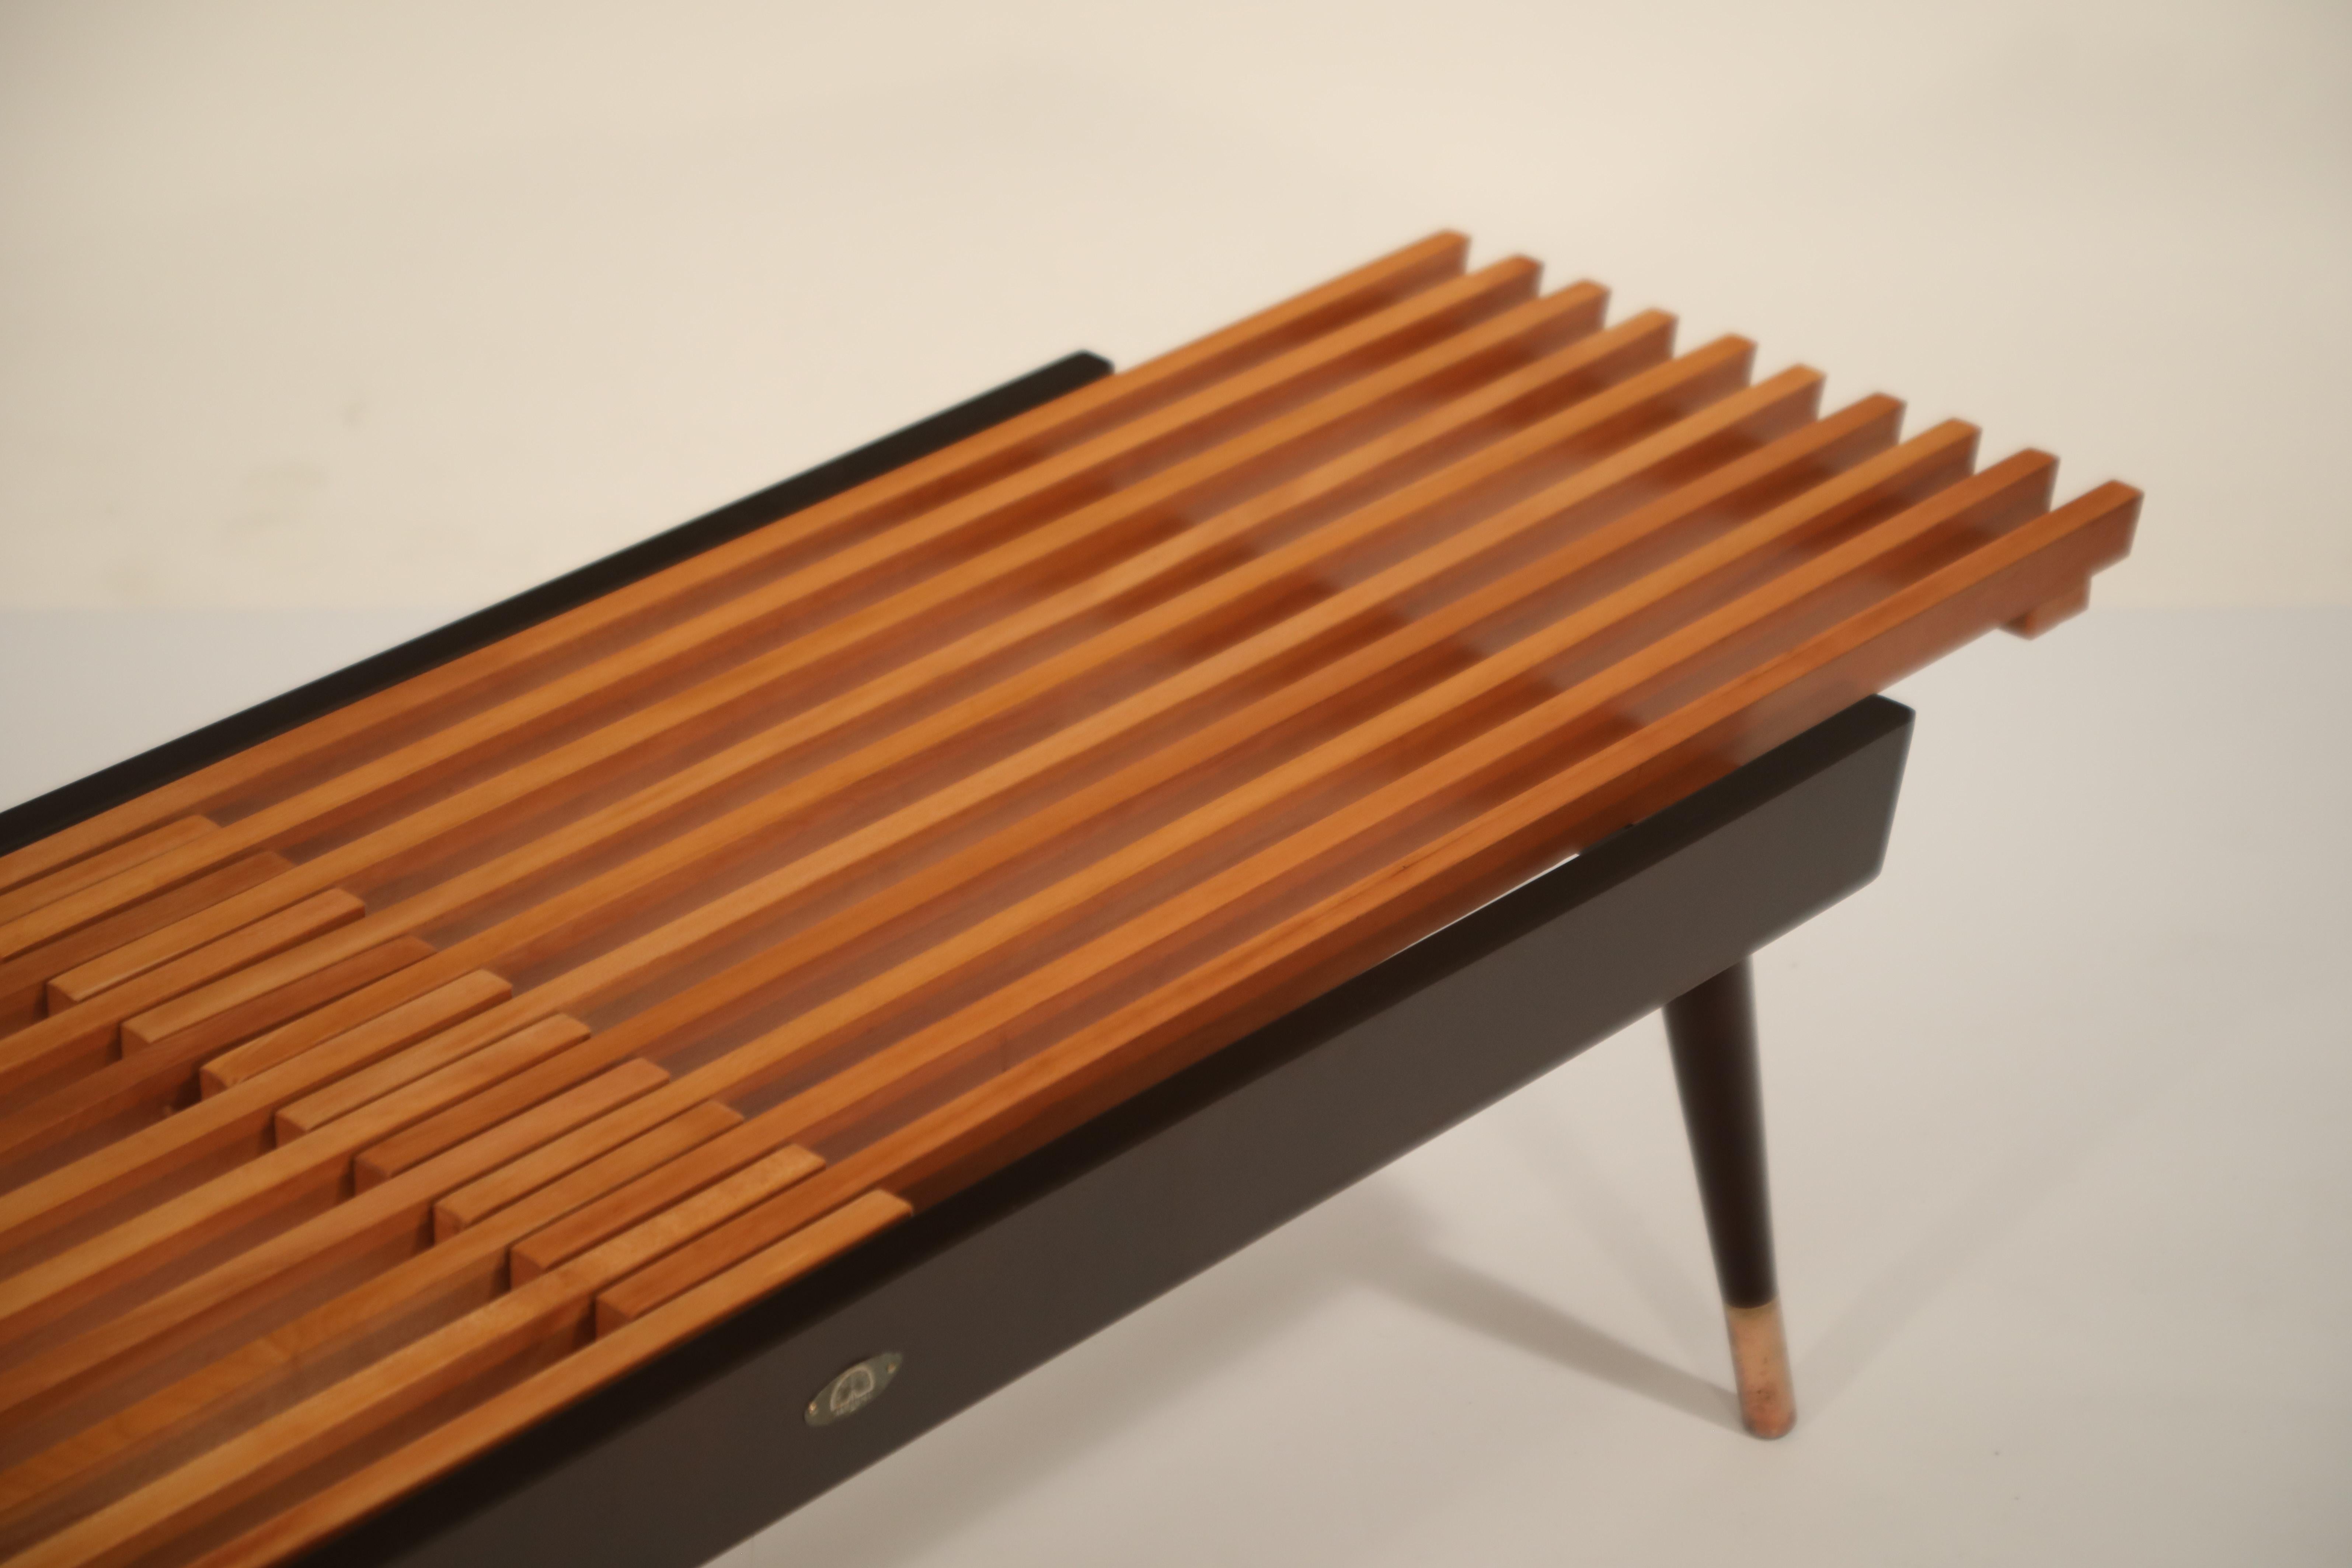 Extendable Slatted Wood Bench or Coffee Table by Maruni, 1950s Hiroshima Japan 8